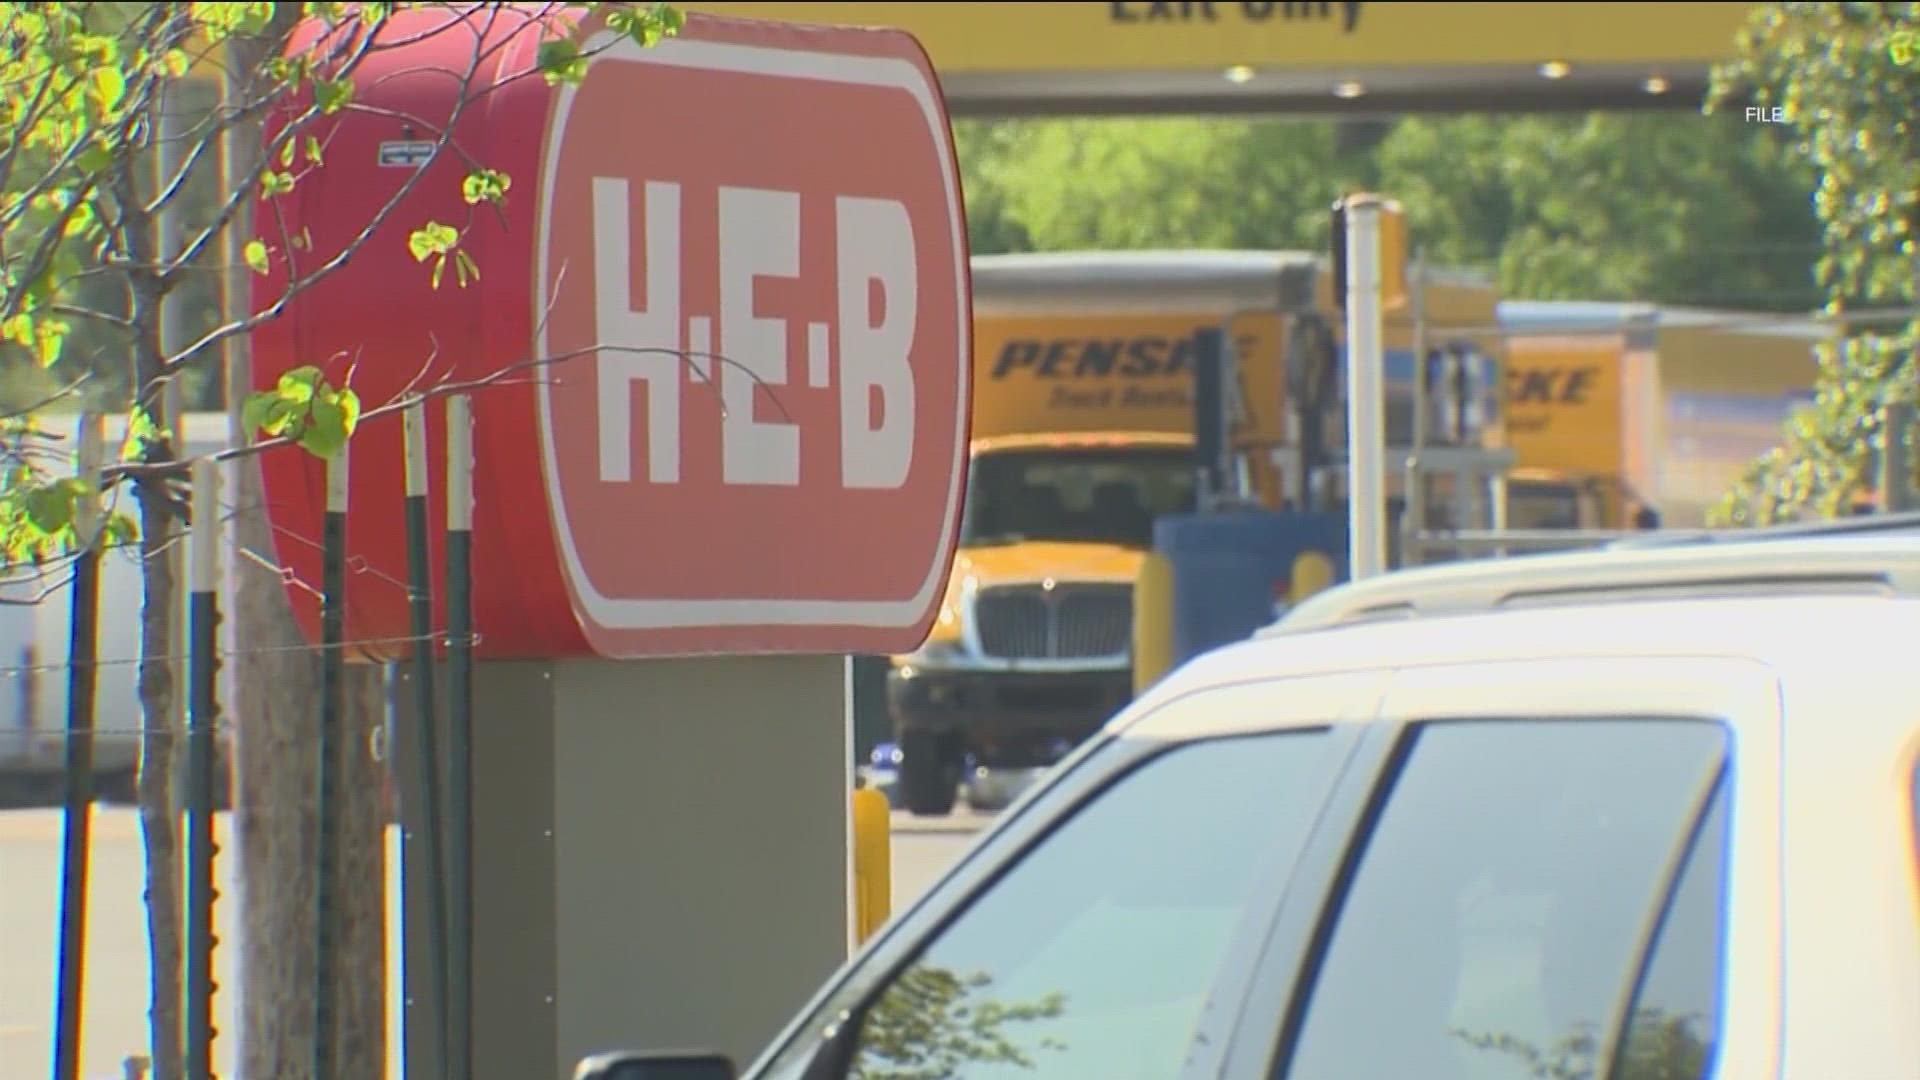 Leander's H-E-B Plus now features an e-commerce fulfillment center to keep up with online shopping demand.